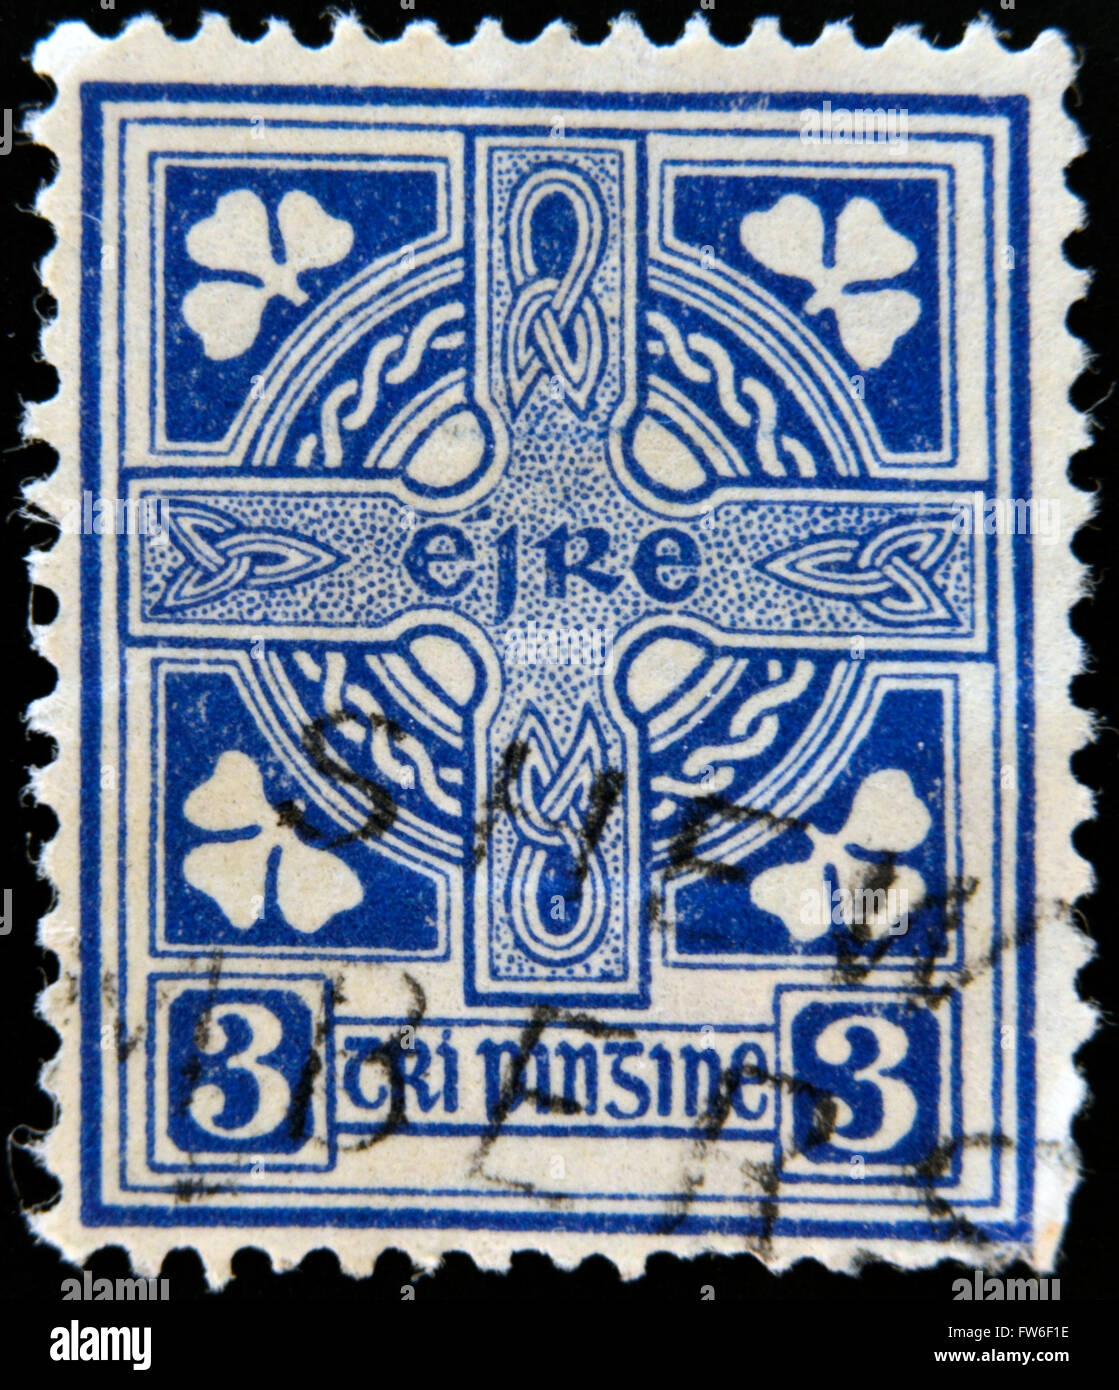 IRELAND-CIRCA 1922: A stamp printed in Ireland shows image of Celtic cross is a symbol that combines a cross with a ring surroun Stock Photo